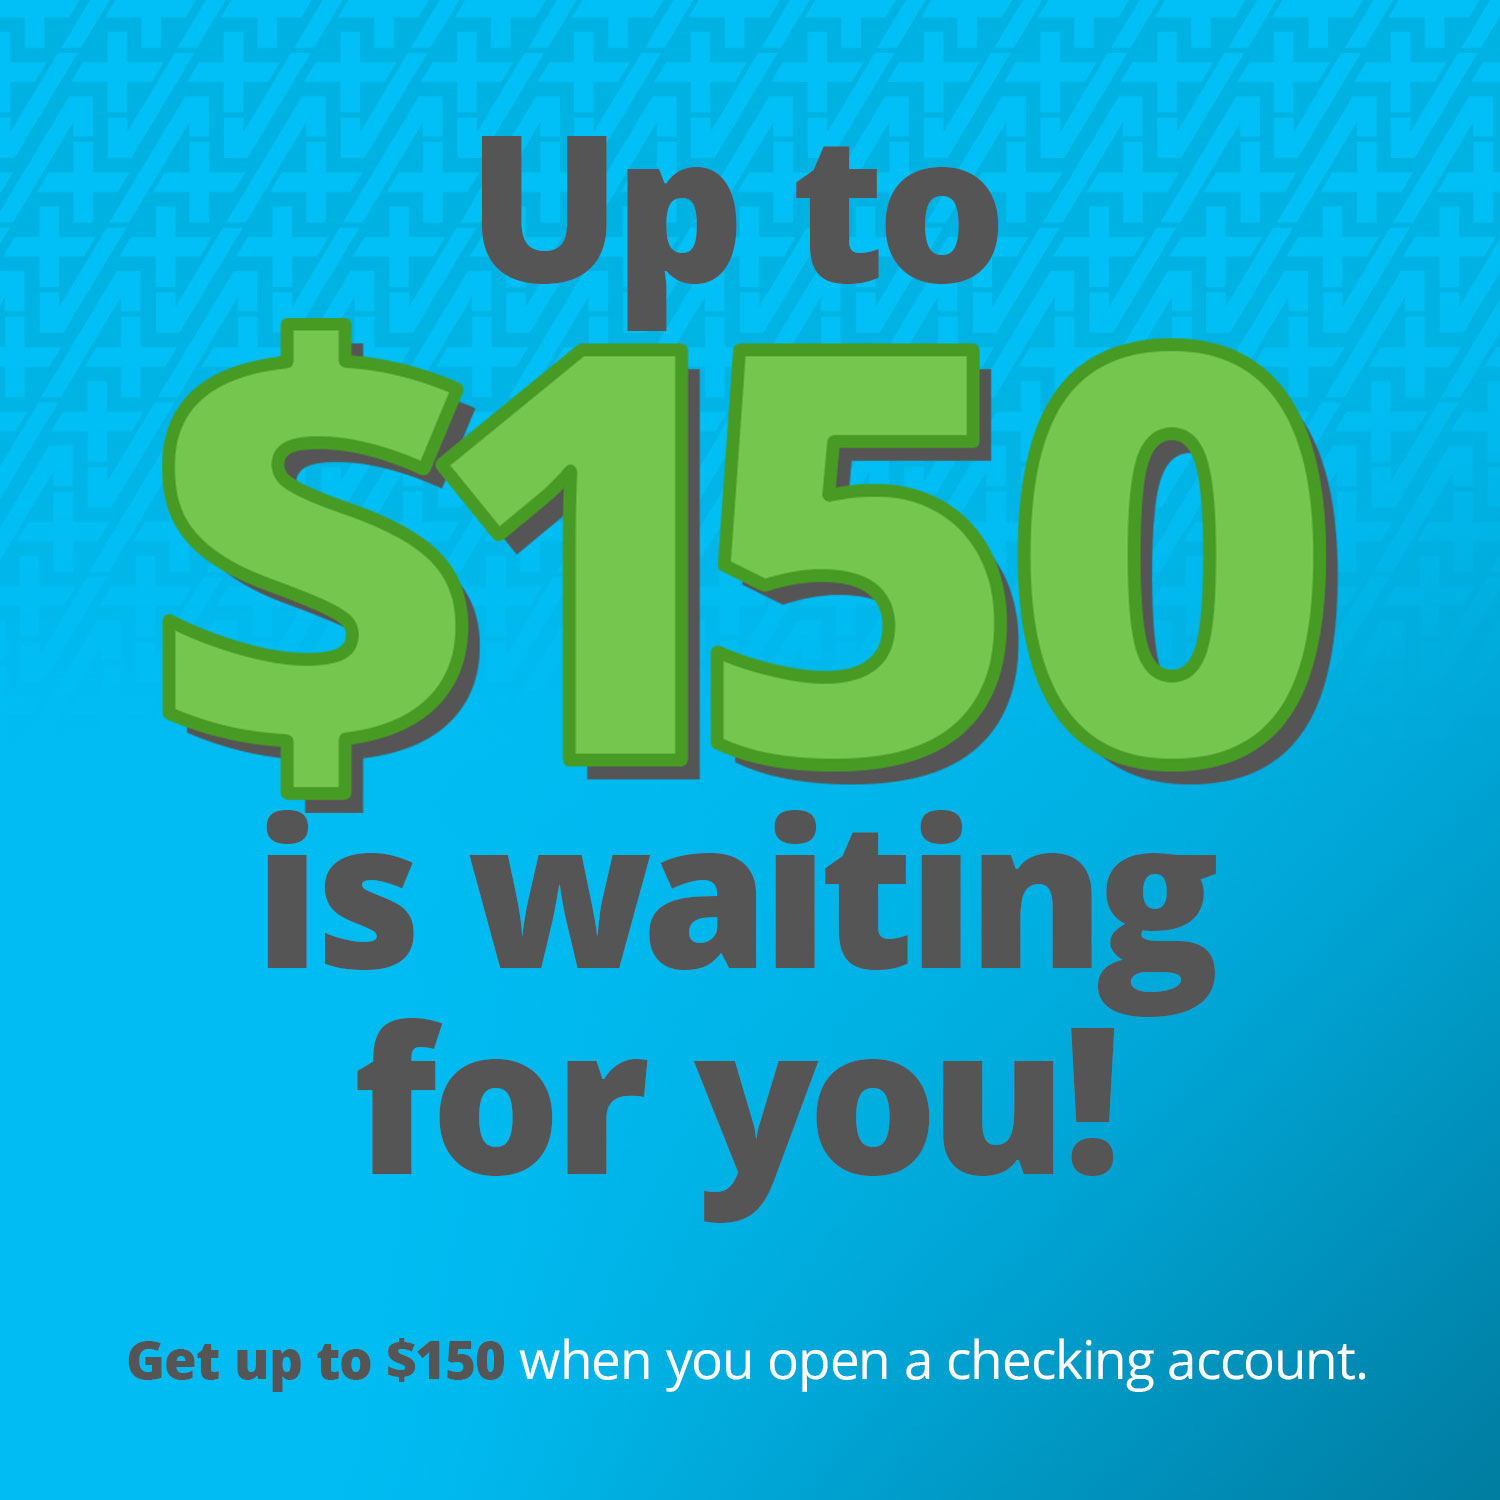 Up to $150 is waiting for you!